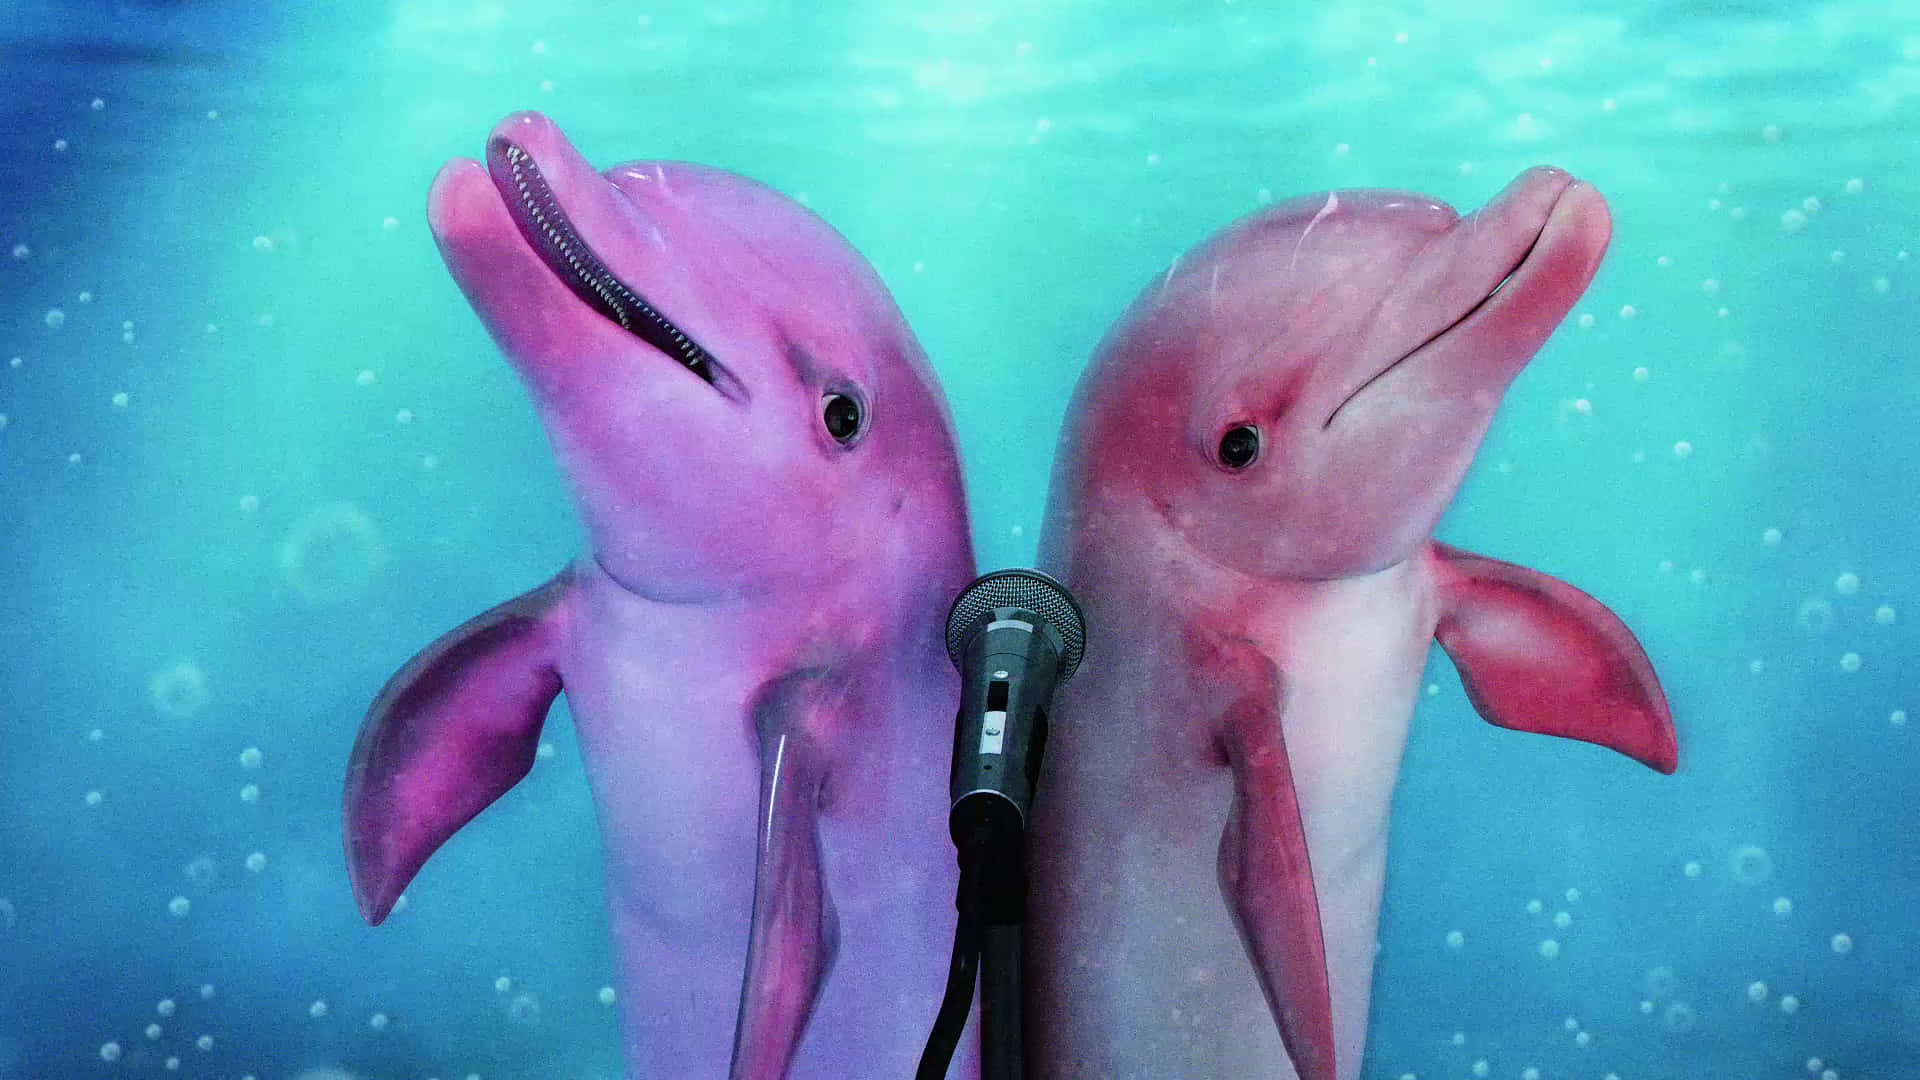 Two Dolphins Are Holding A Microphone In The Water Background